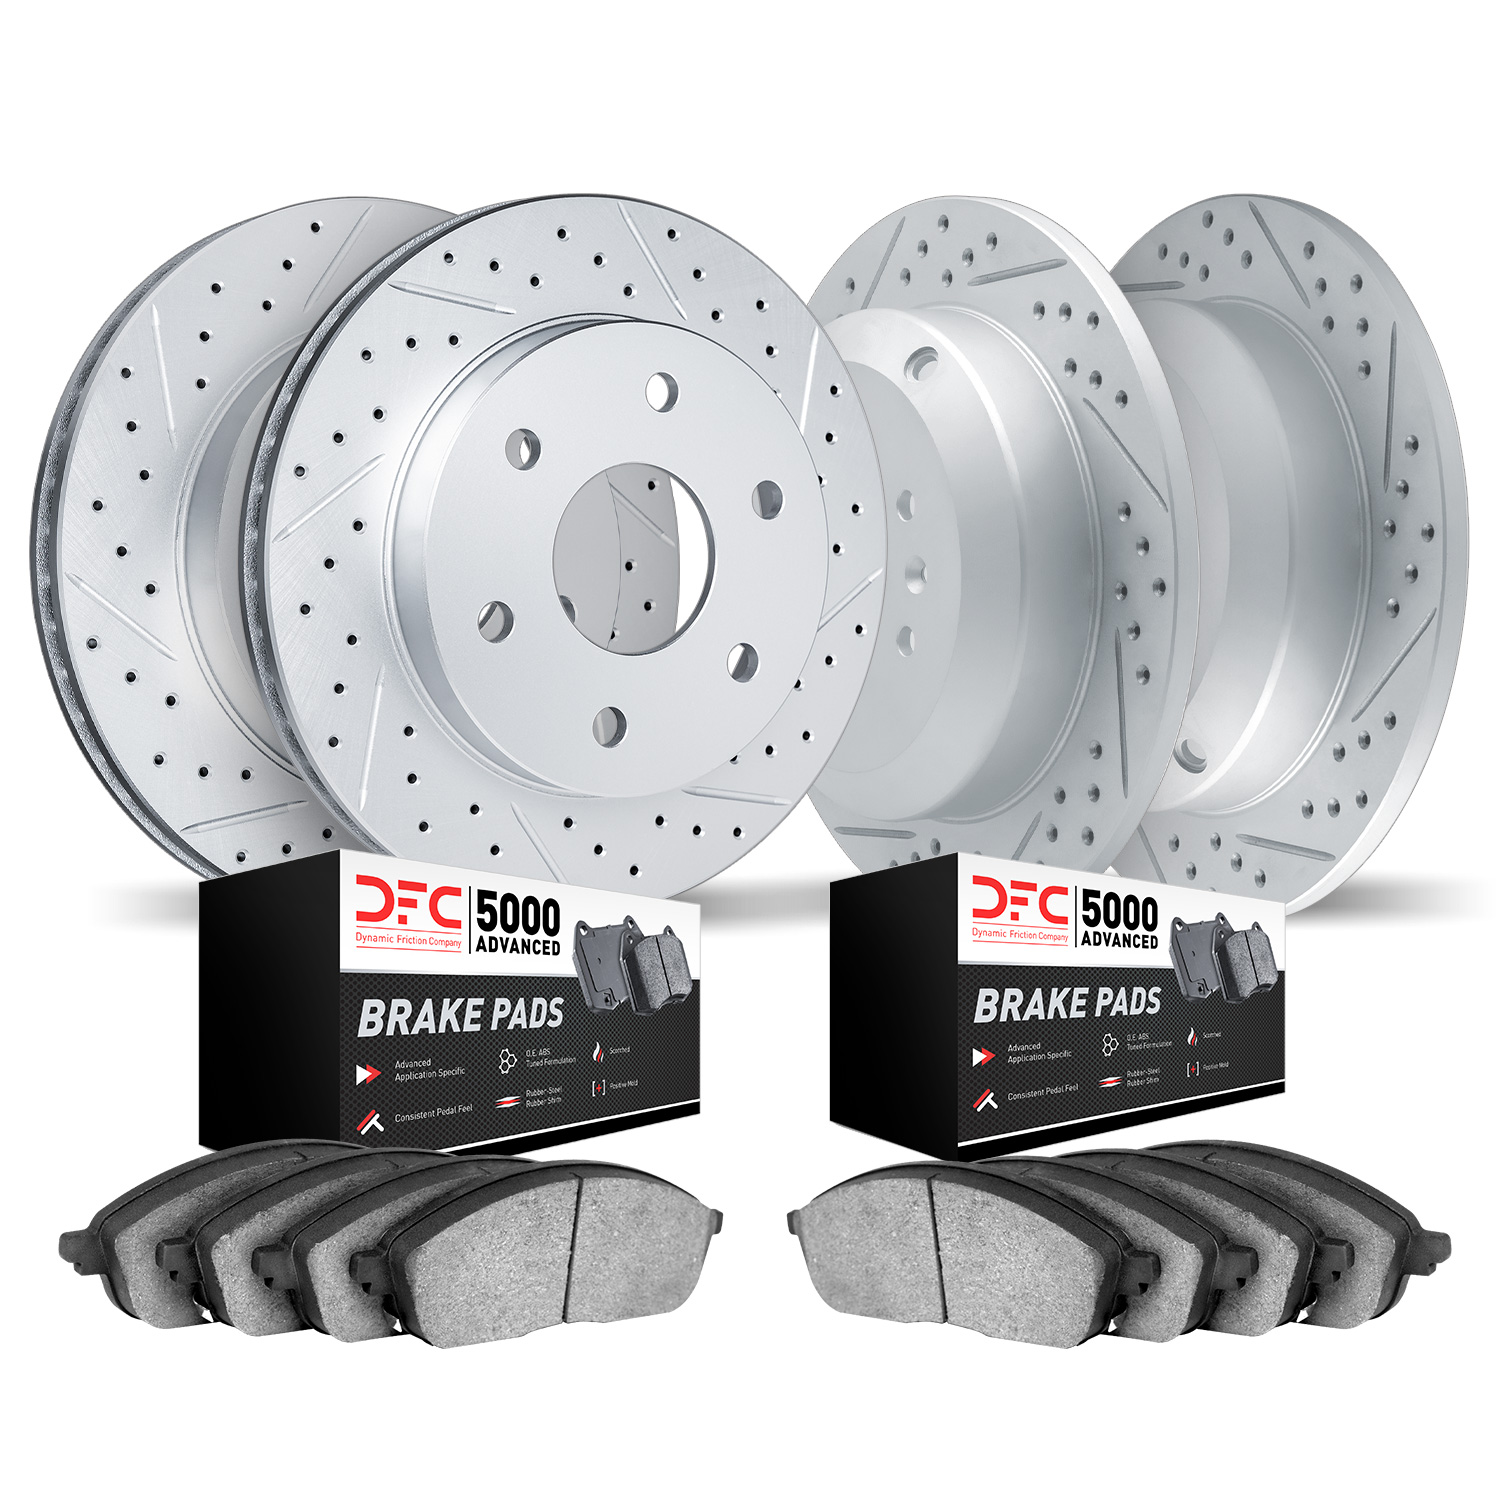 2504-54305 Geoperformance Drilled/Slotted Rotors w/5000 Advanced Brake Pads Kit, Fits Select Ford/Lincoln/Mercury/Mazda, Positio